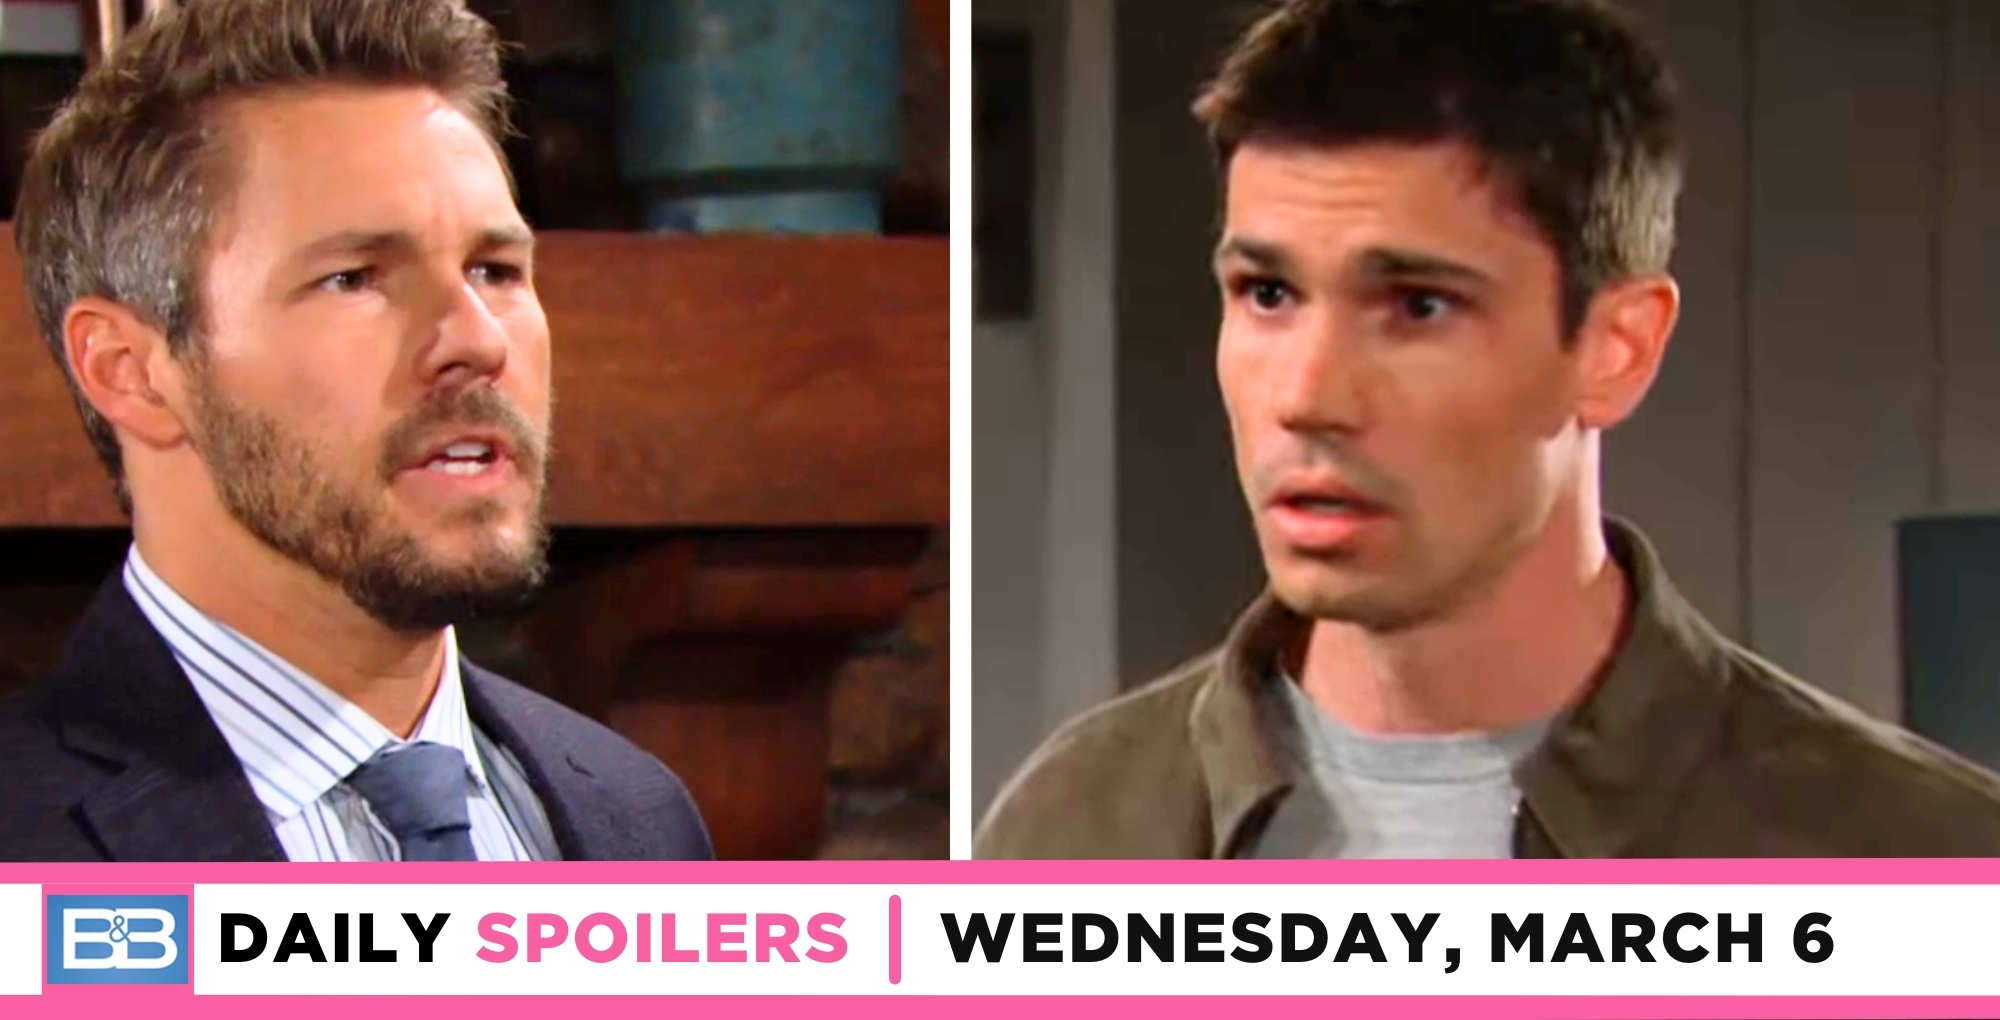 bold and the beautiful spoilers for wednesday, march 6 episode 9224 feature liam and finn.